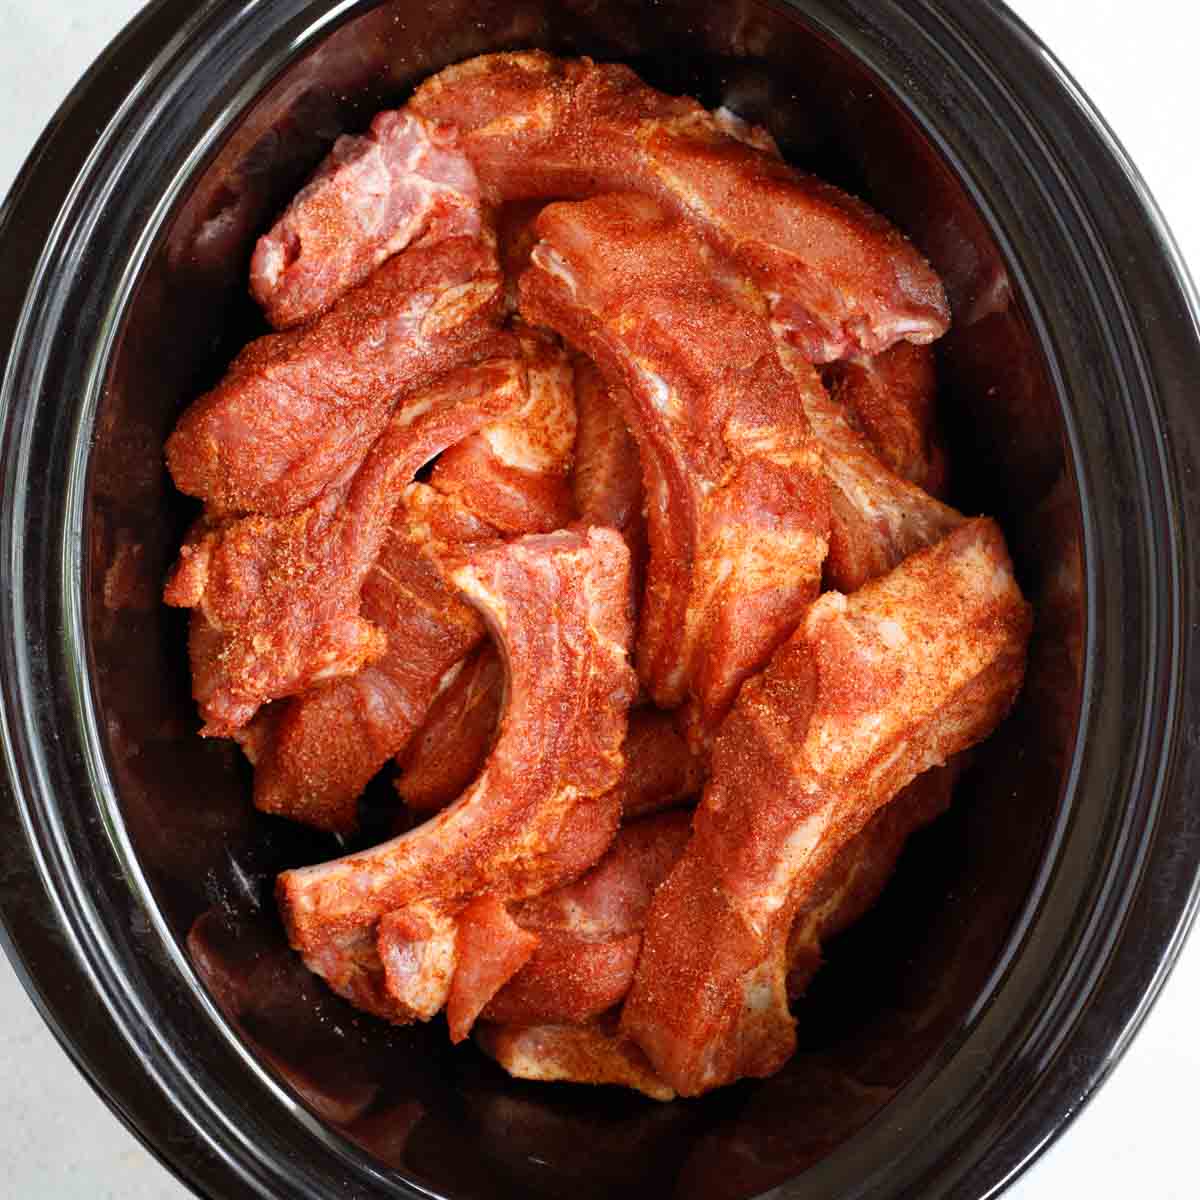 The pork ribs in a crockpot ready to be cooked.